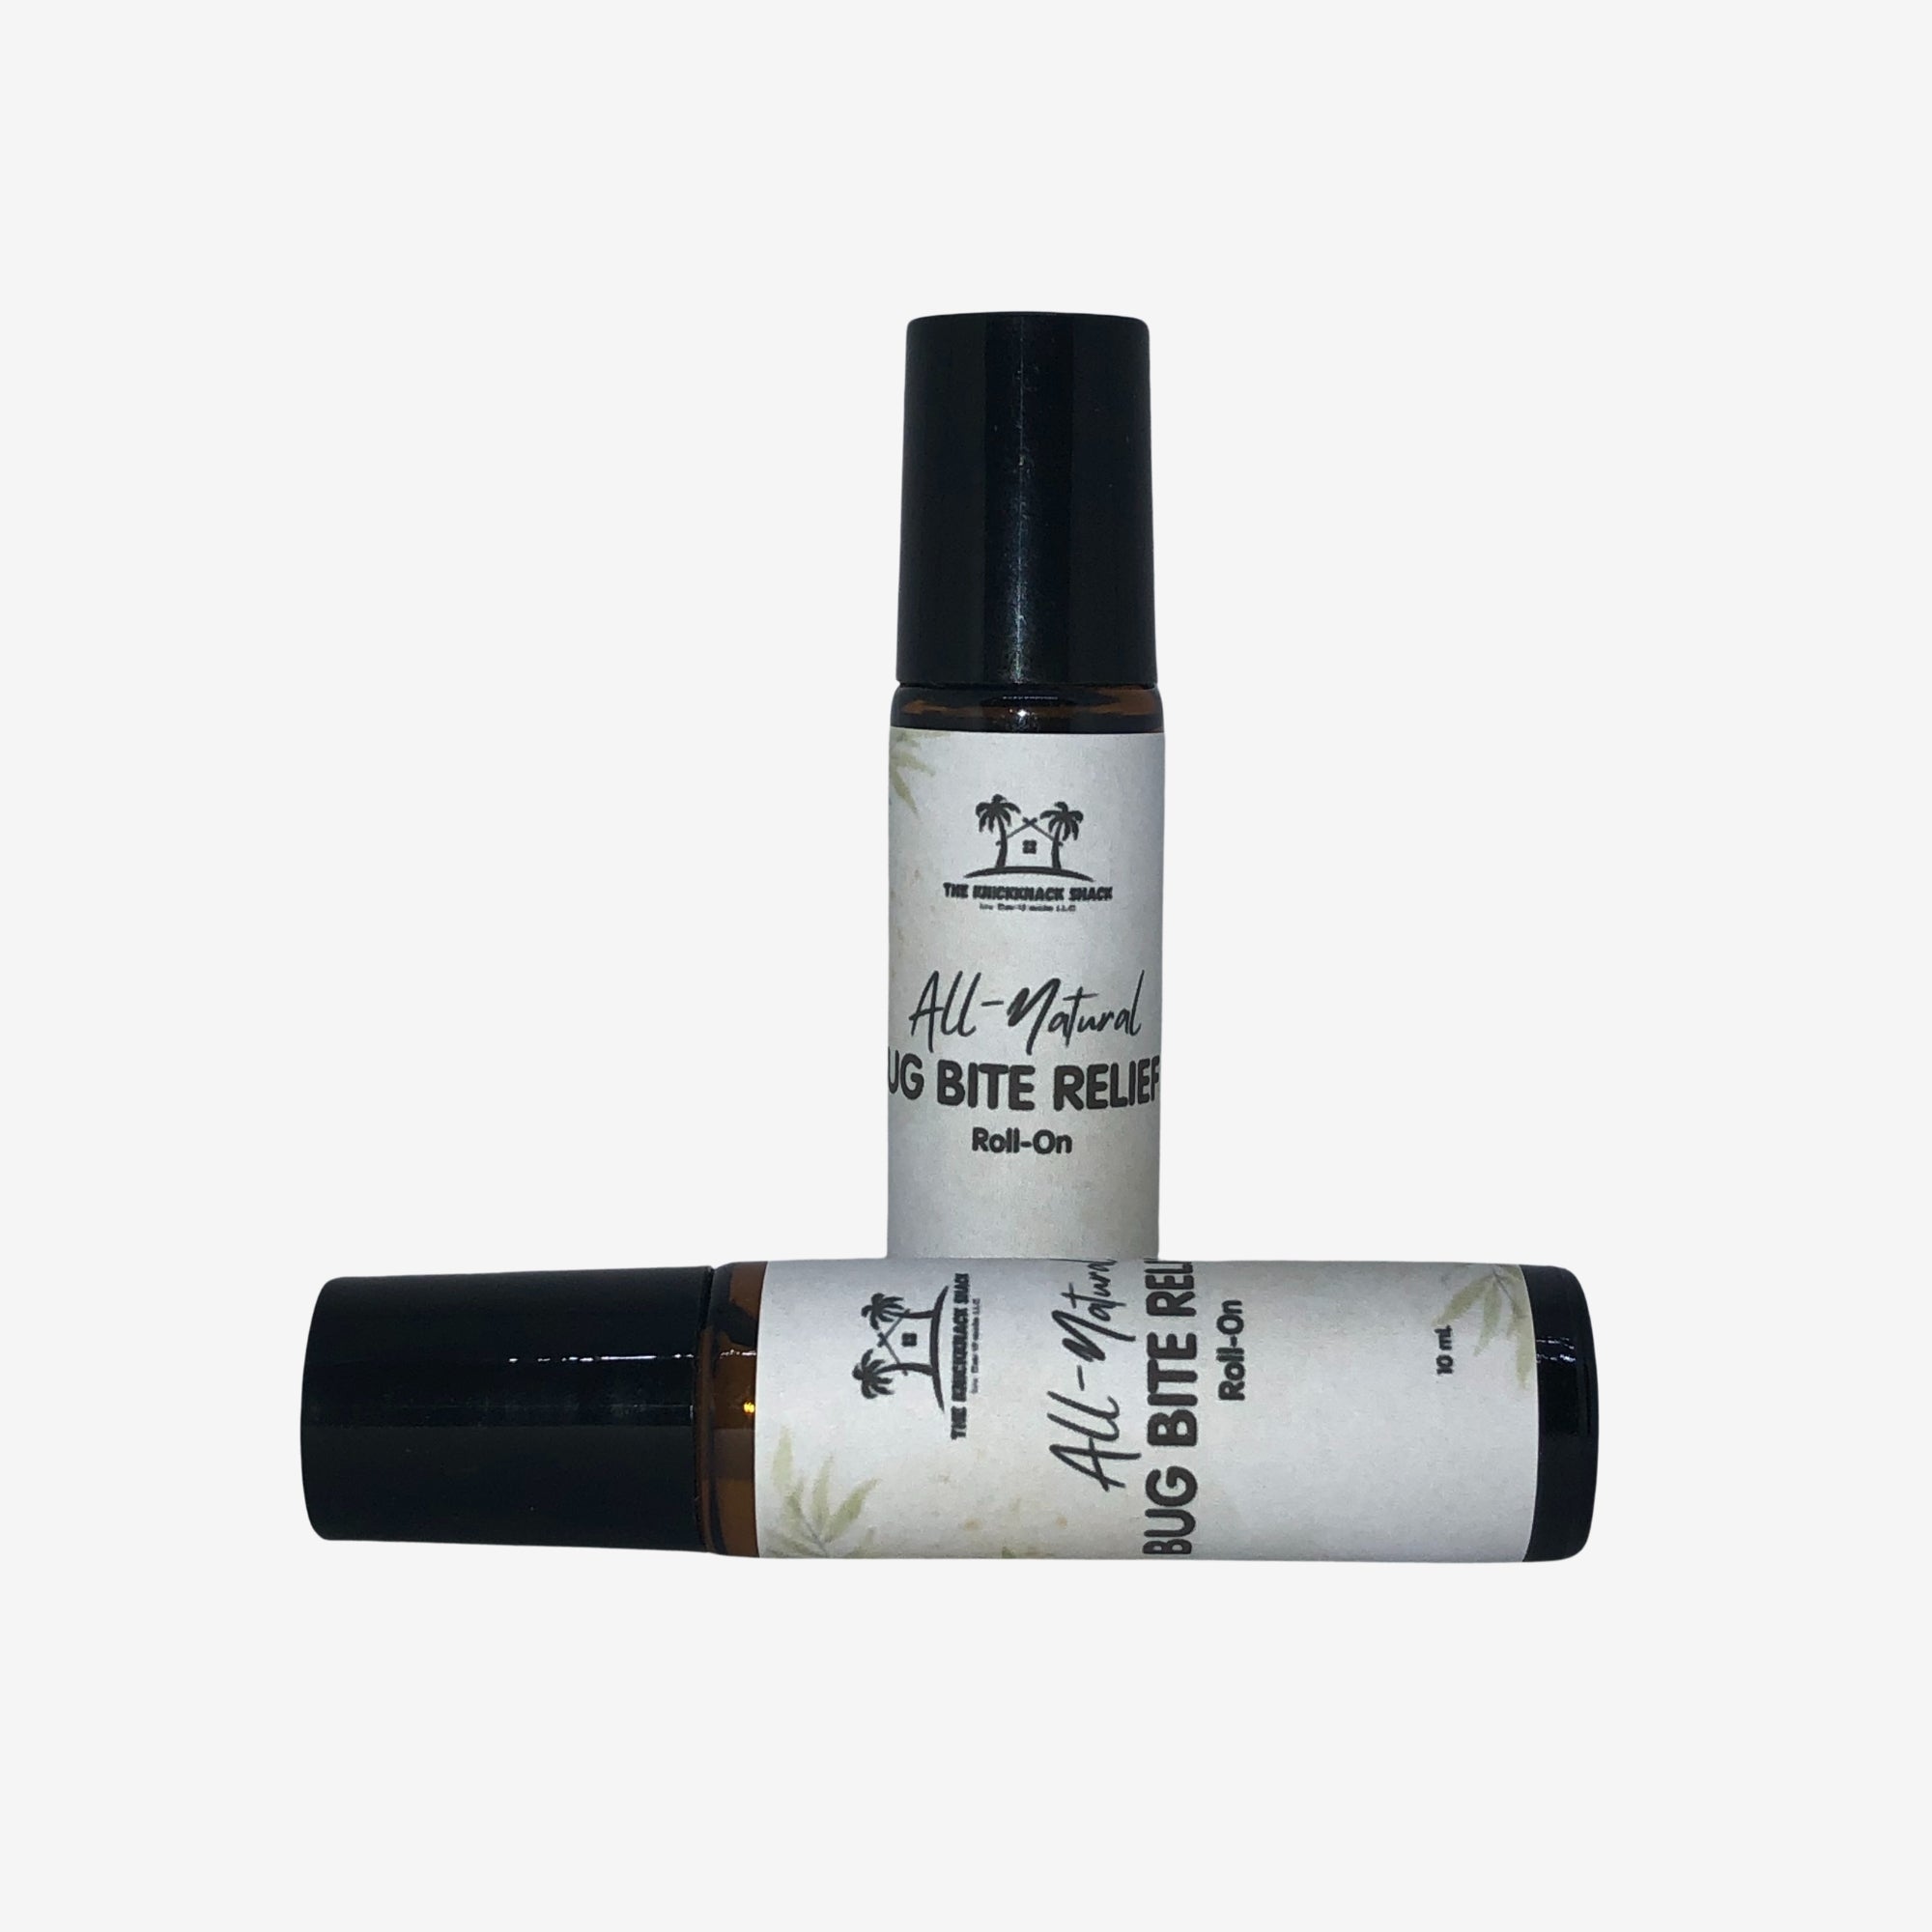 All-Natural Bug Bite Relief Roll-On